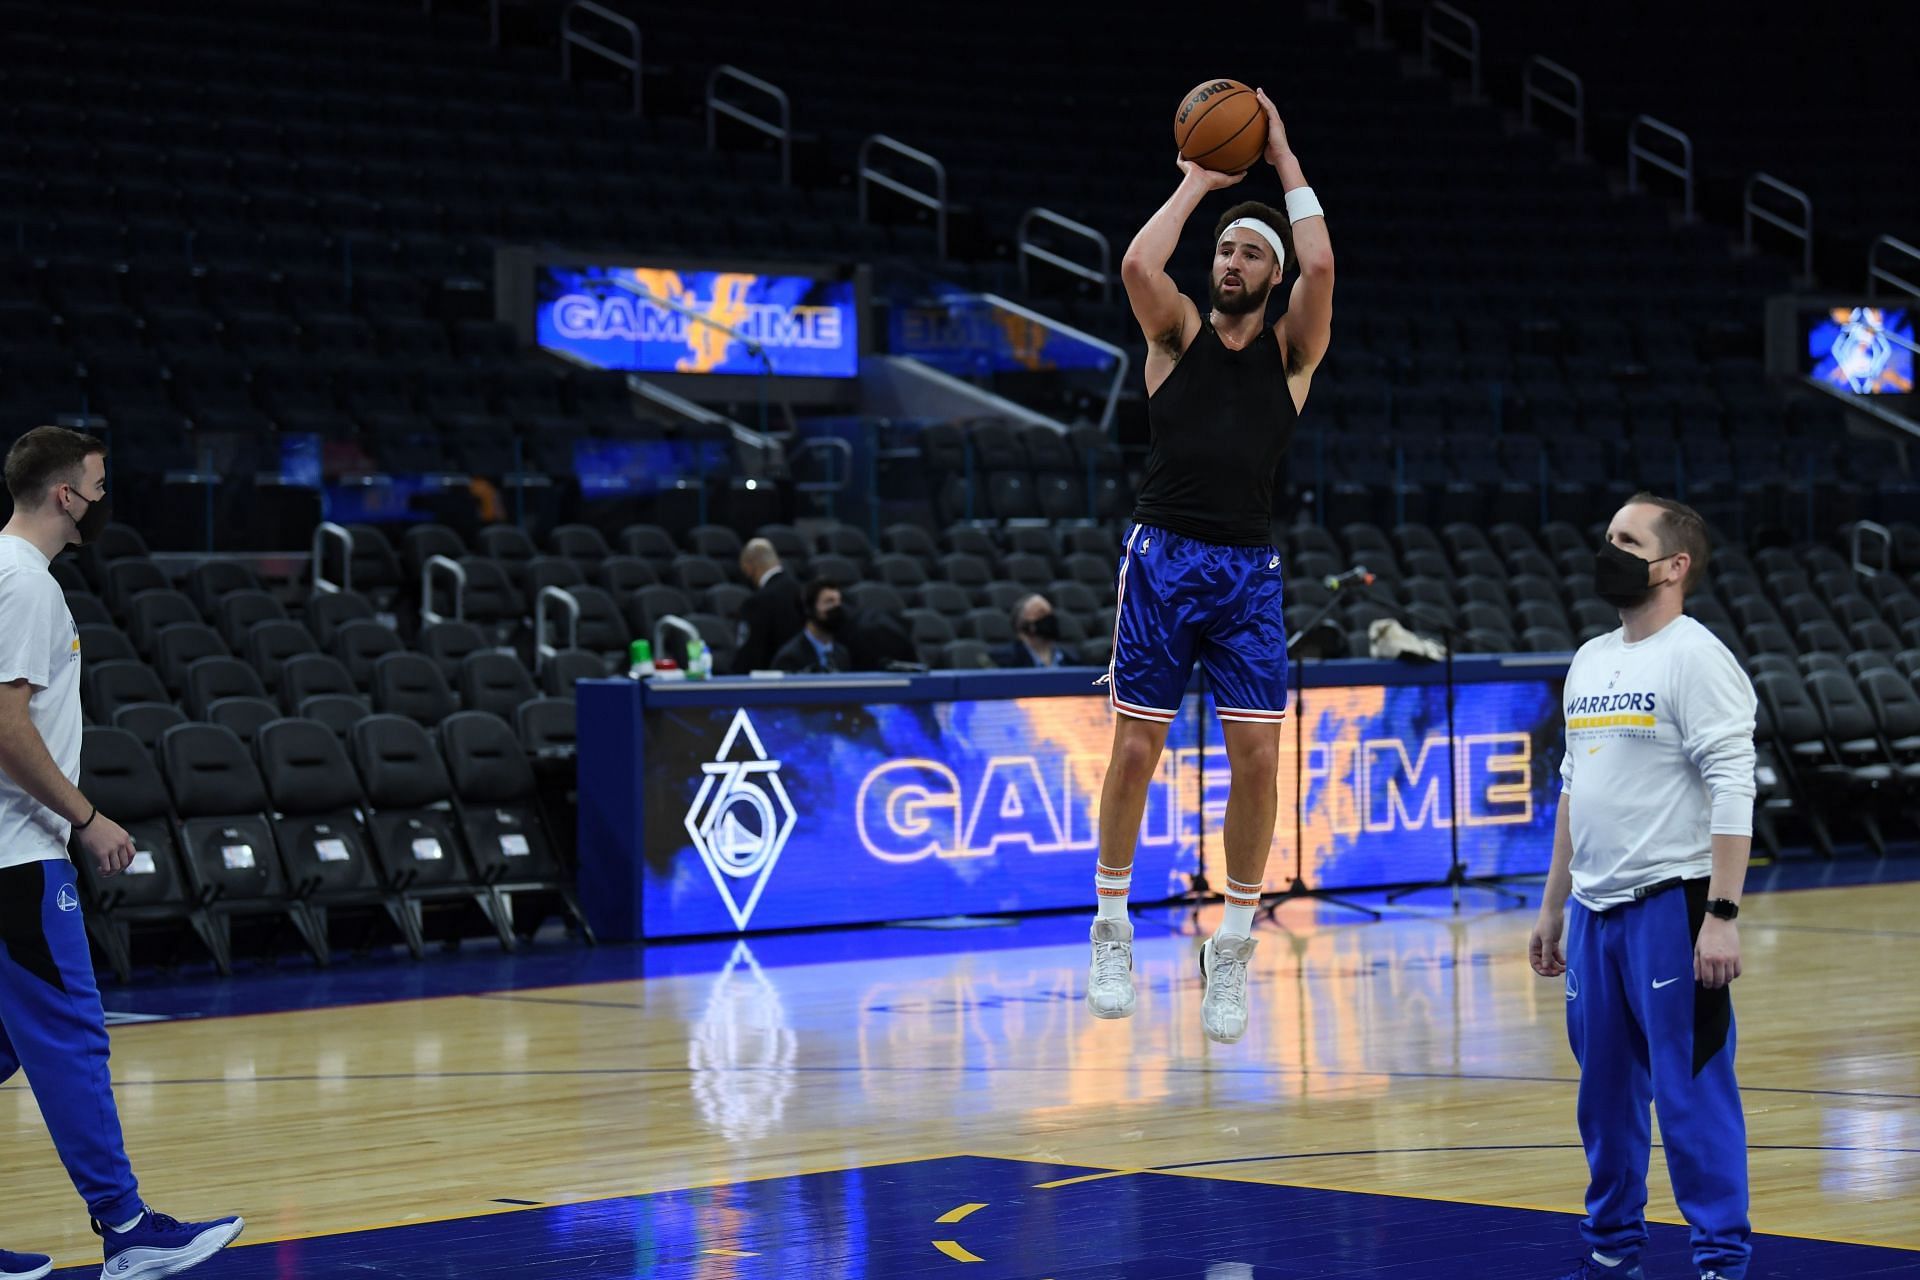 Golden State Warriors Klay Thompson putting up shots before a game